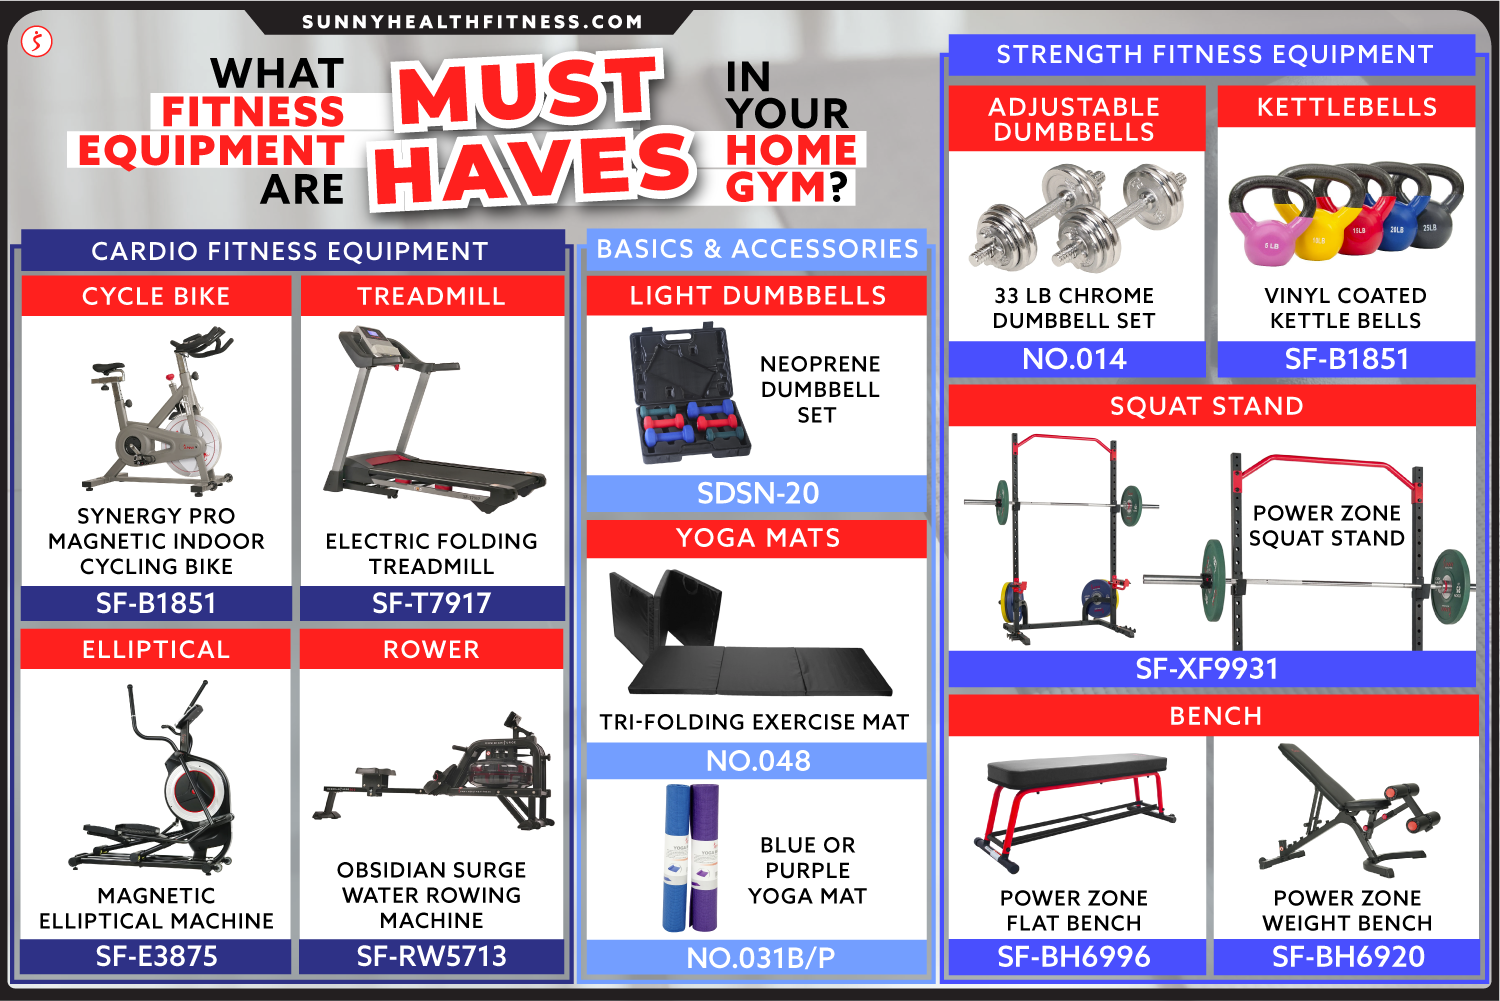 Your Ultimate Guide to Gym Equipment: Names, How to Use, Price & More